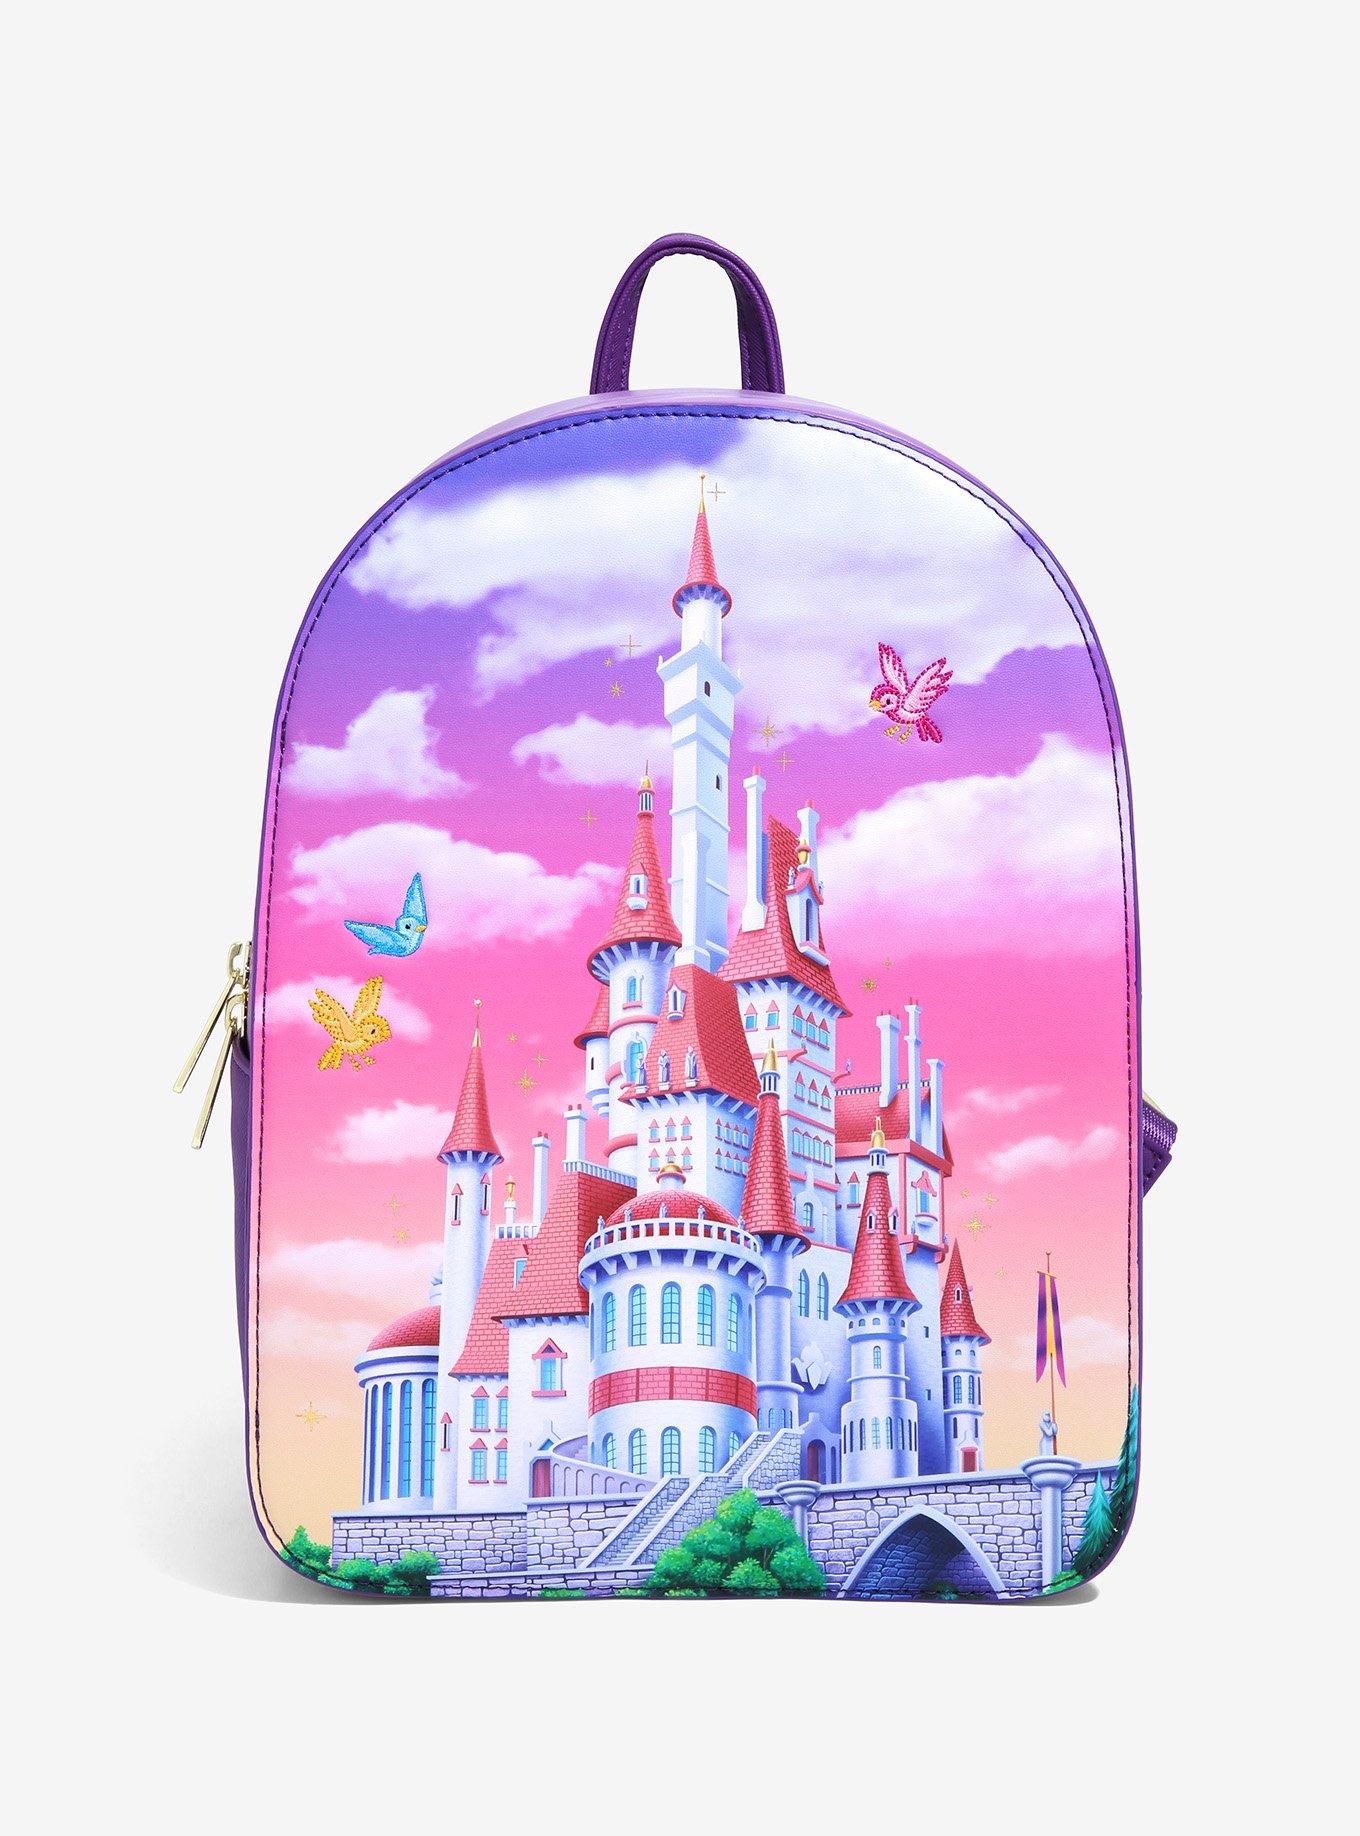 The ULTIMATE Sleeping Beauty Backpack Is For Sale On Boxlunch